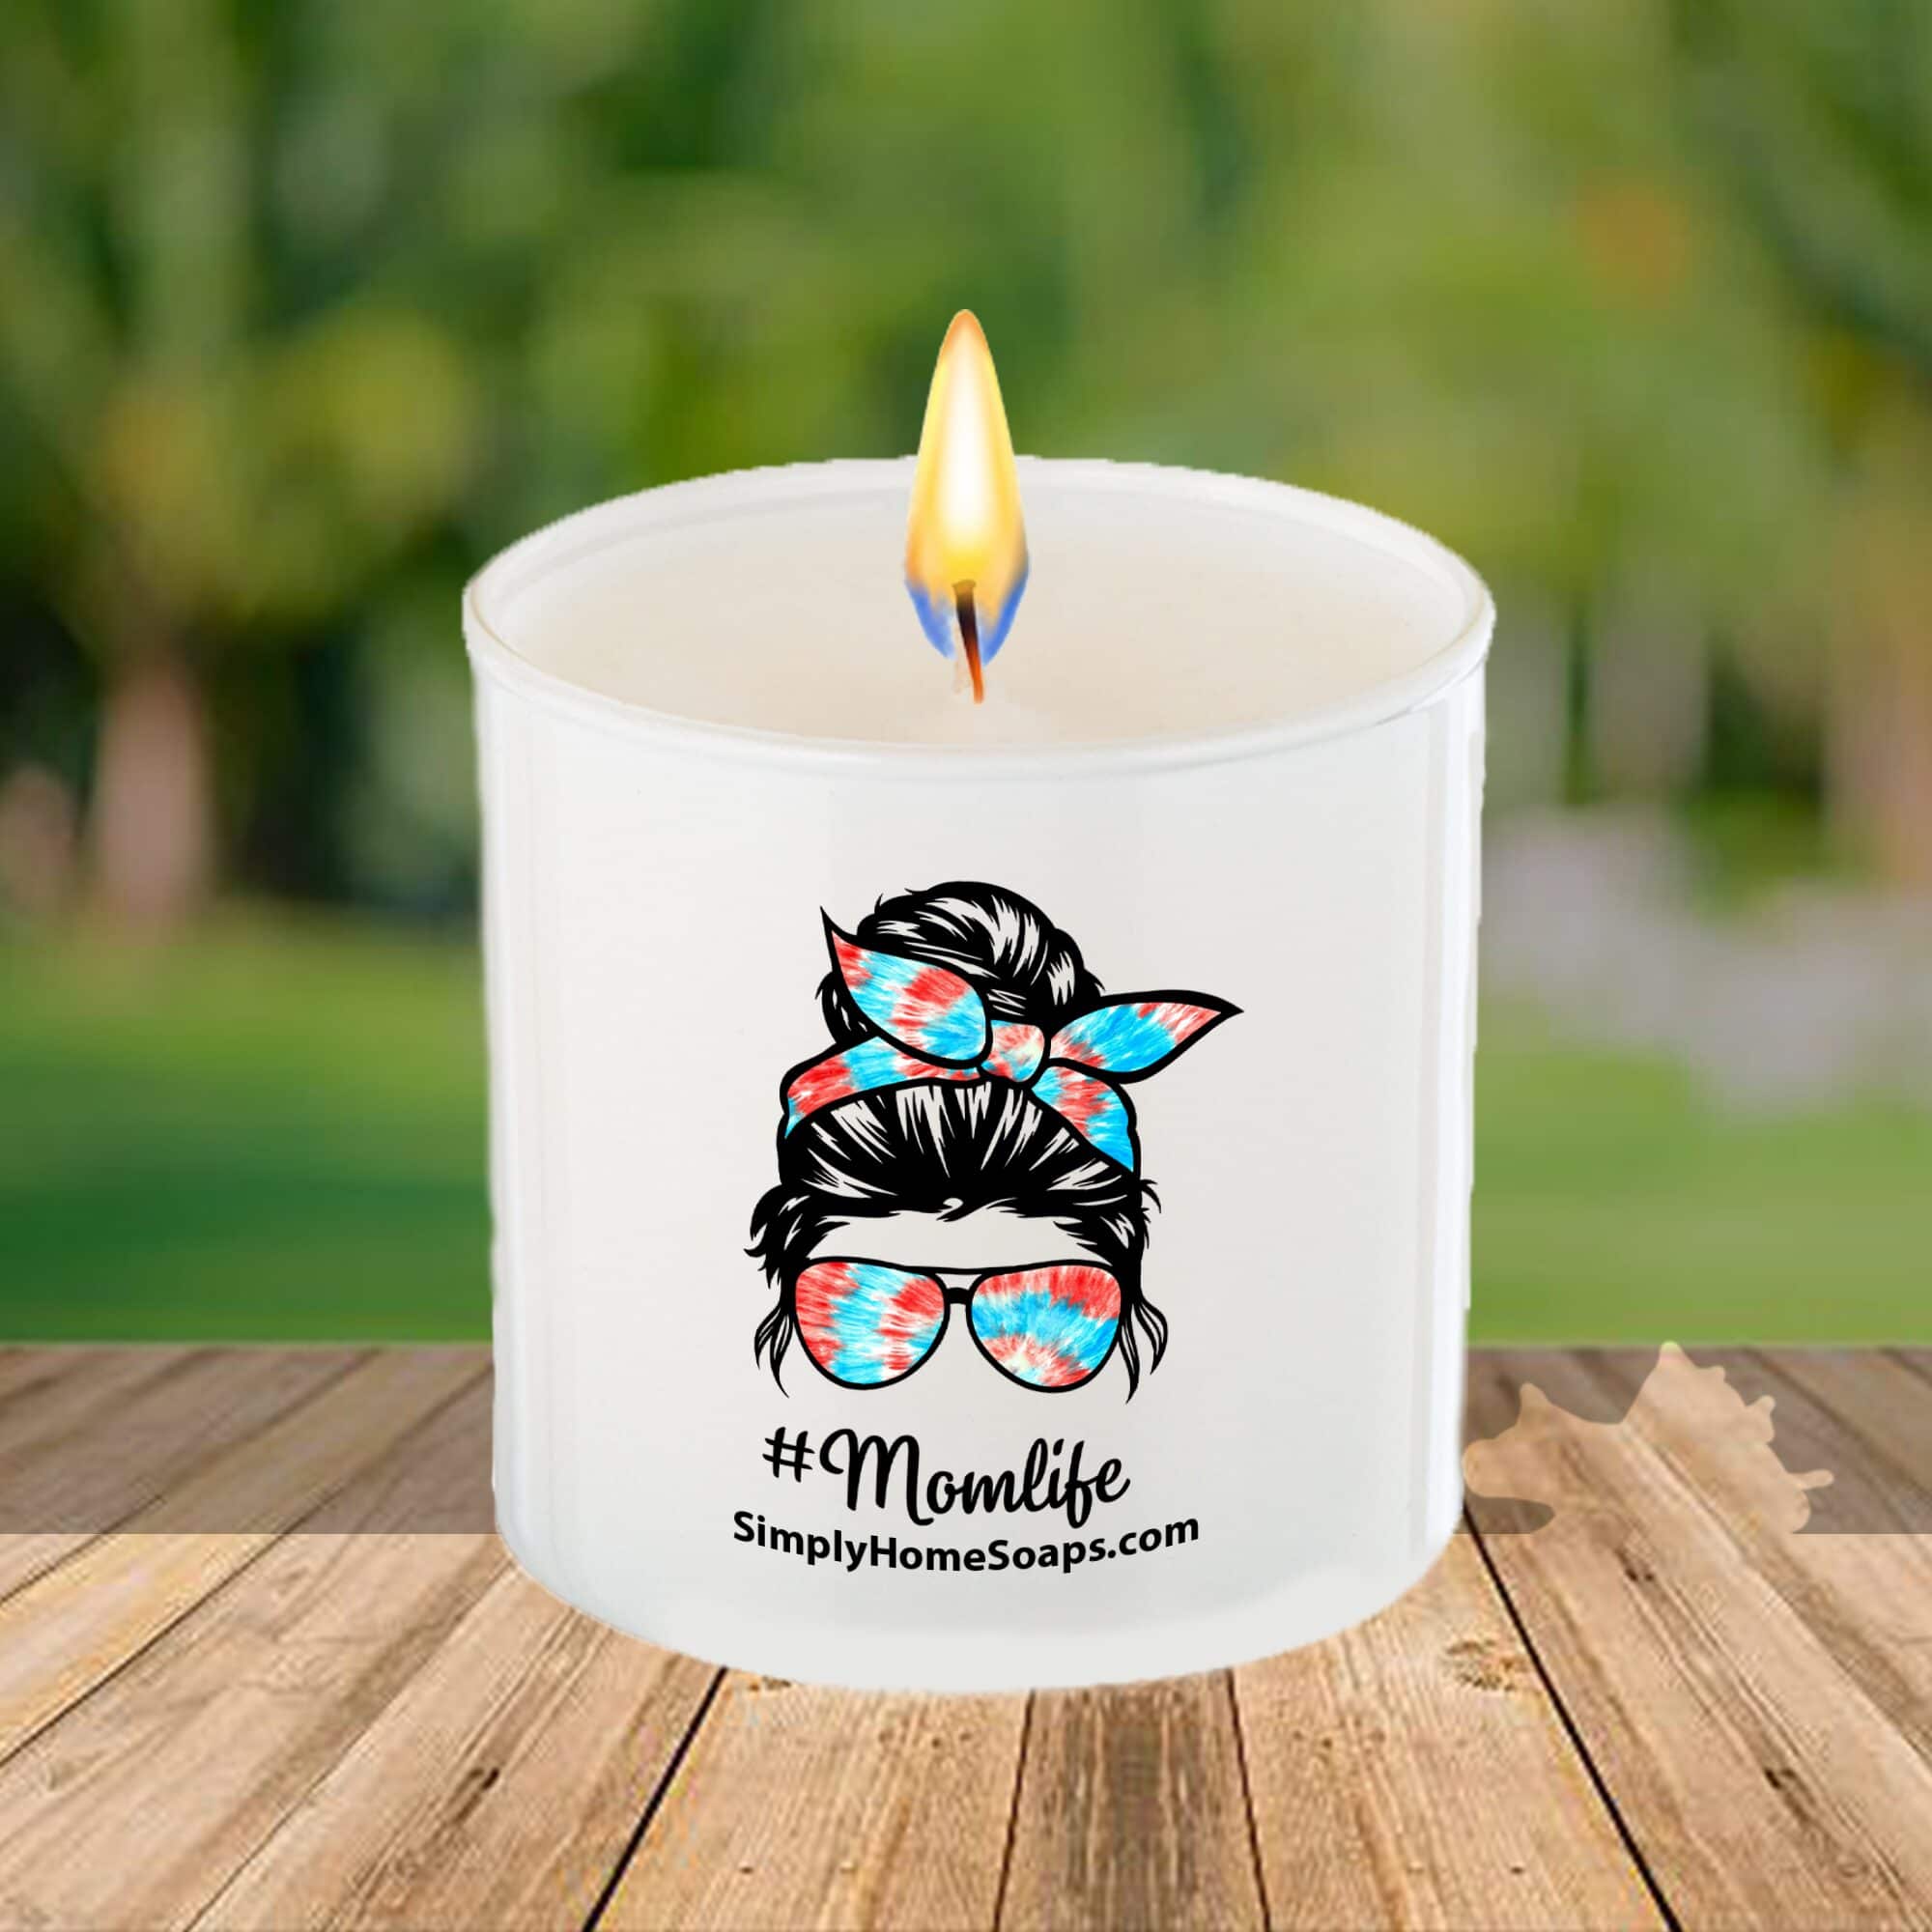 https://simplyhomesoaps.com/wp-content/uploads/2022/05/candle-mom-life-messy-bun.jpg